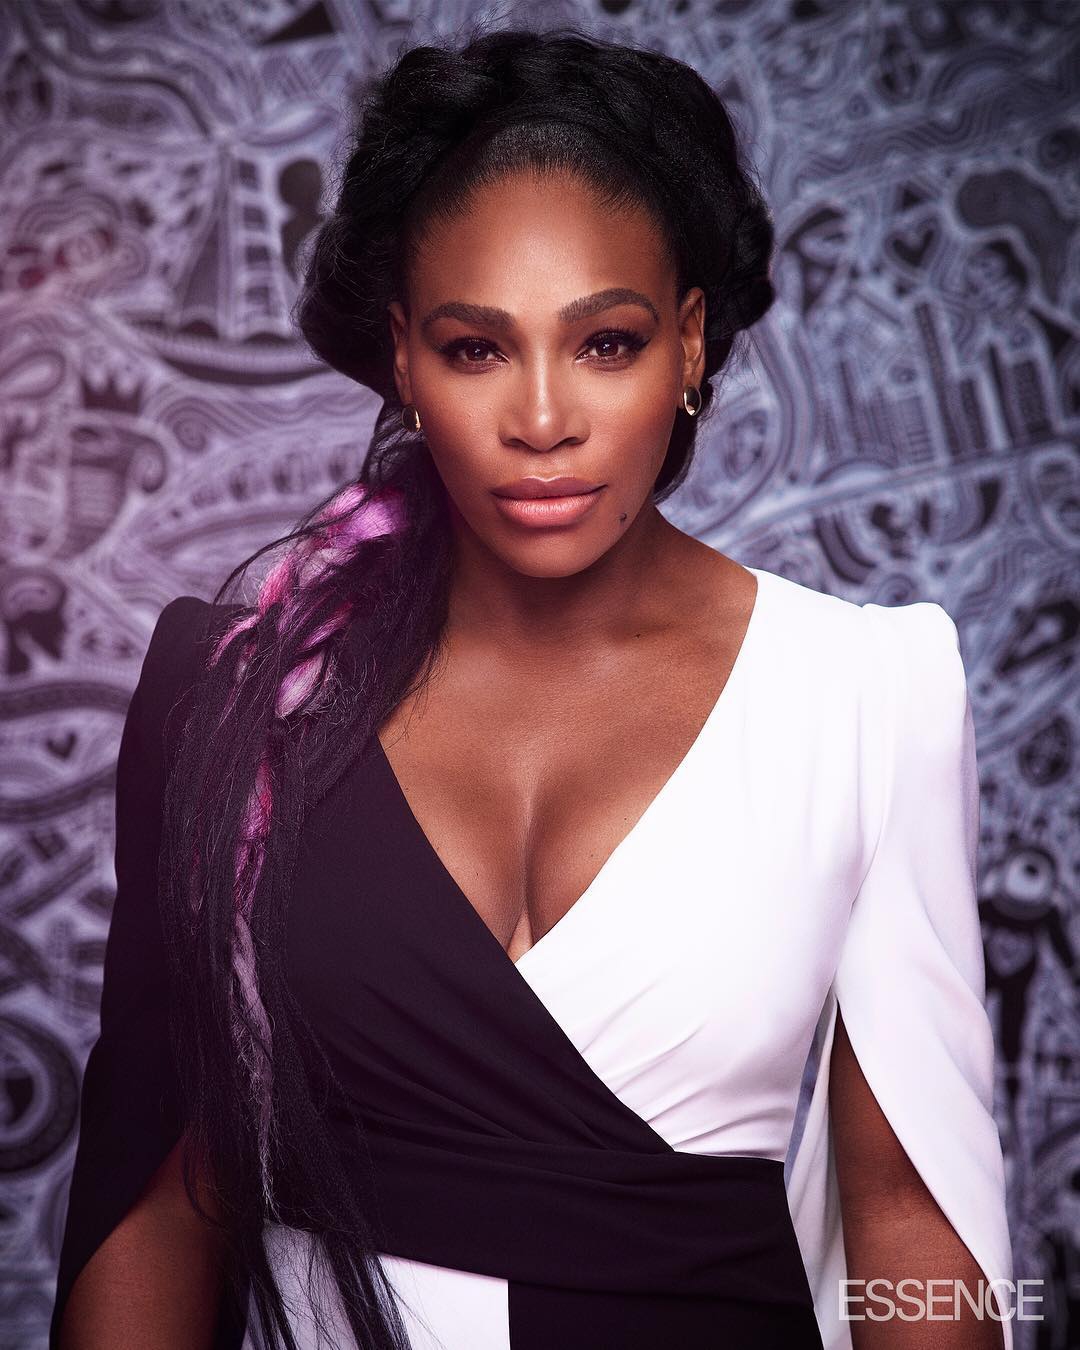 Serena Williams on the cover of Essence magazine